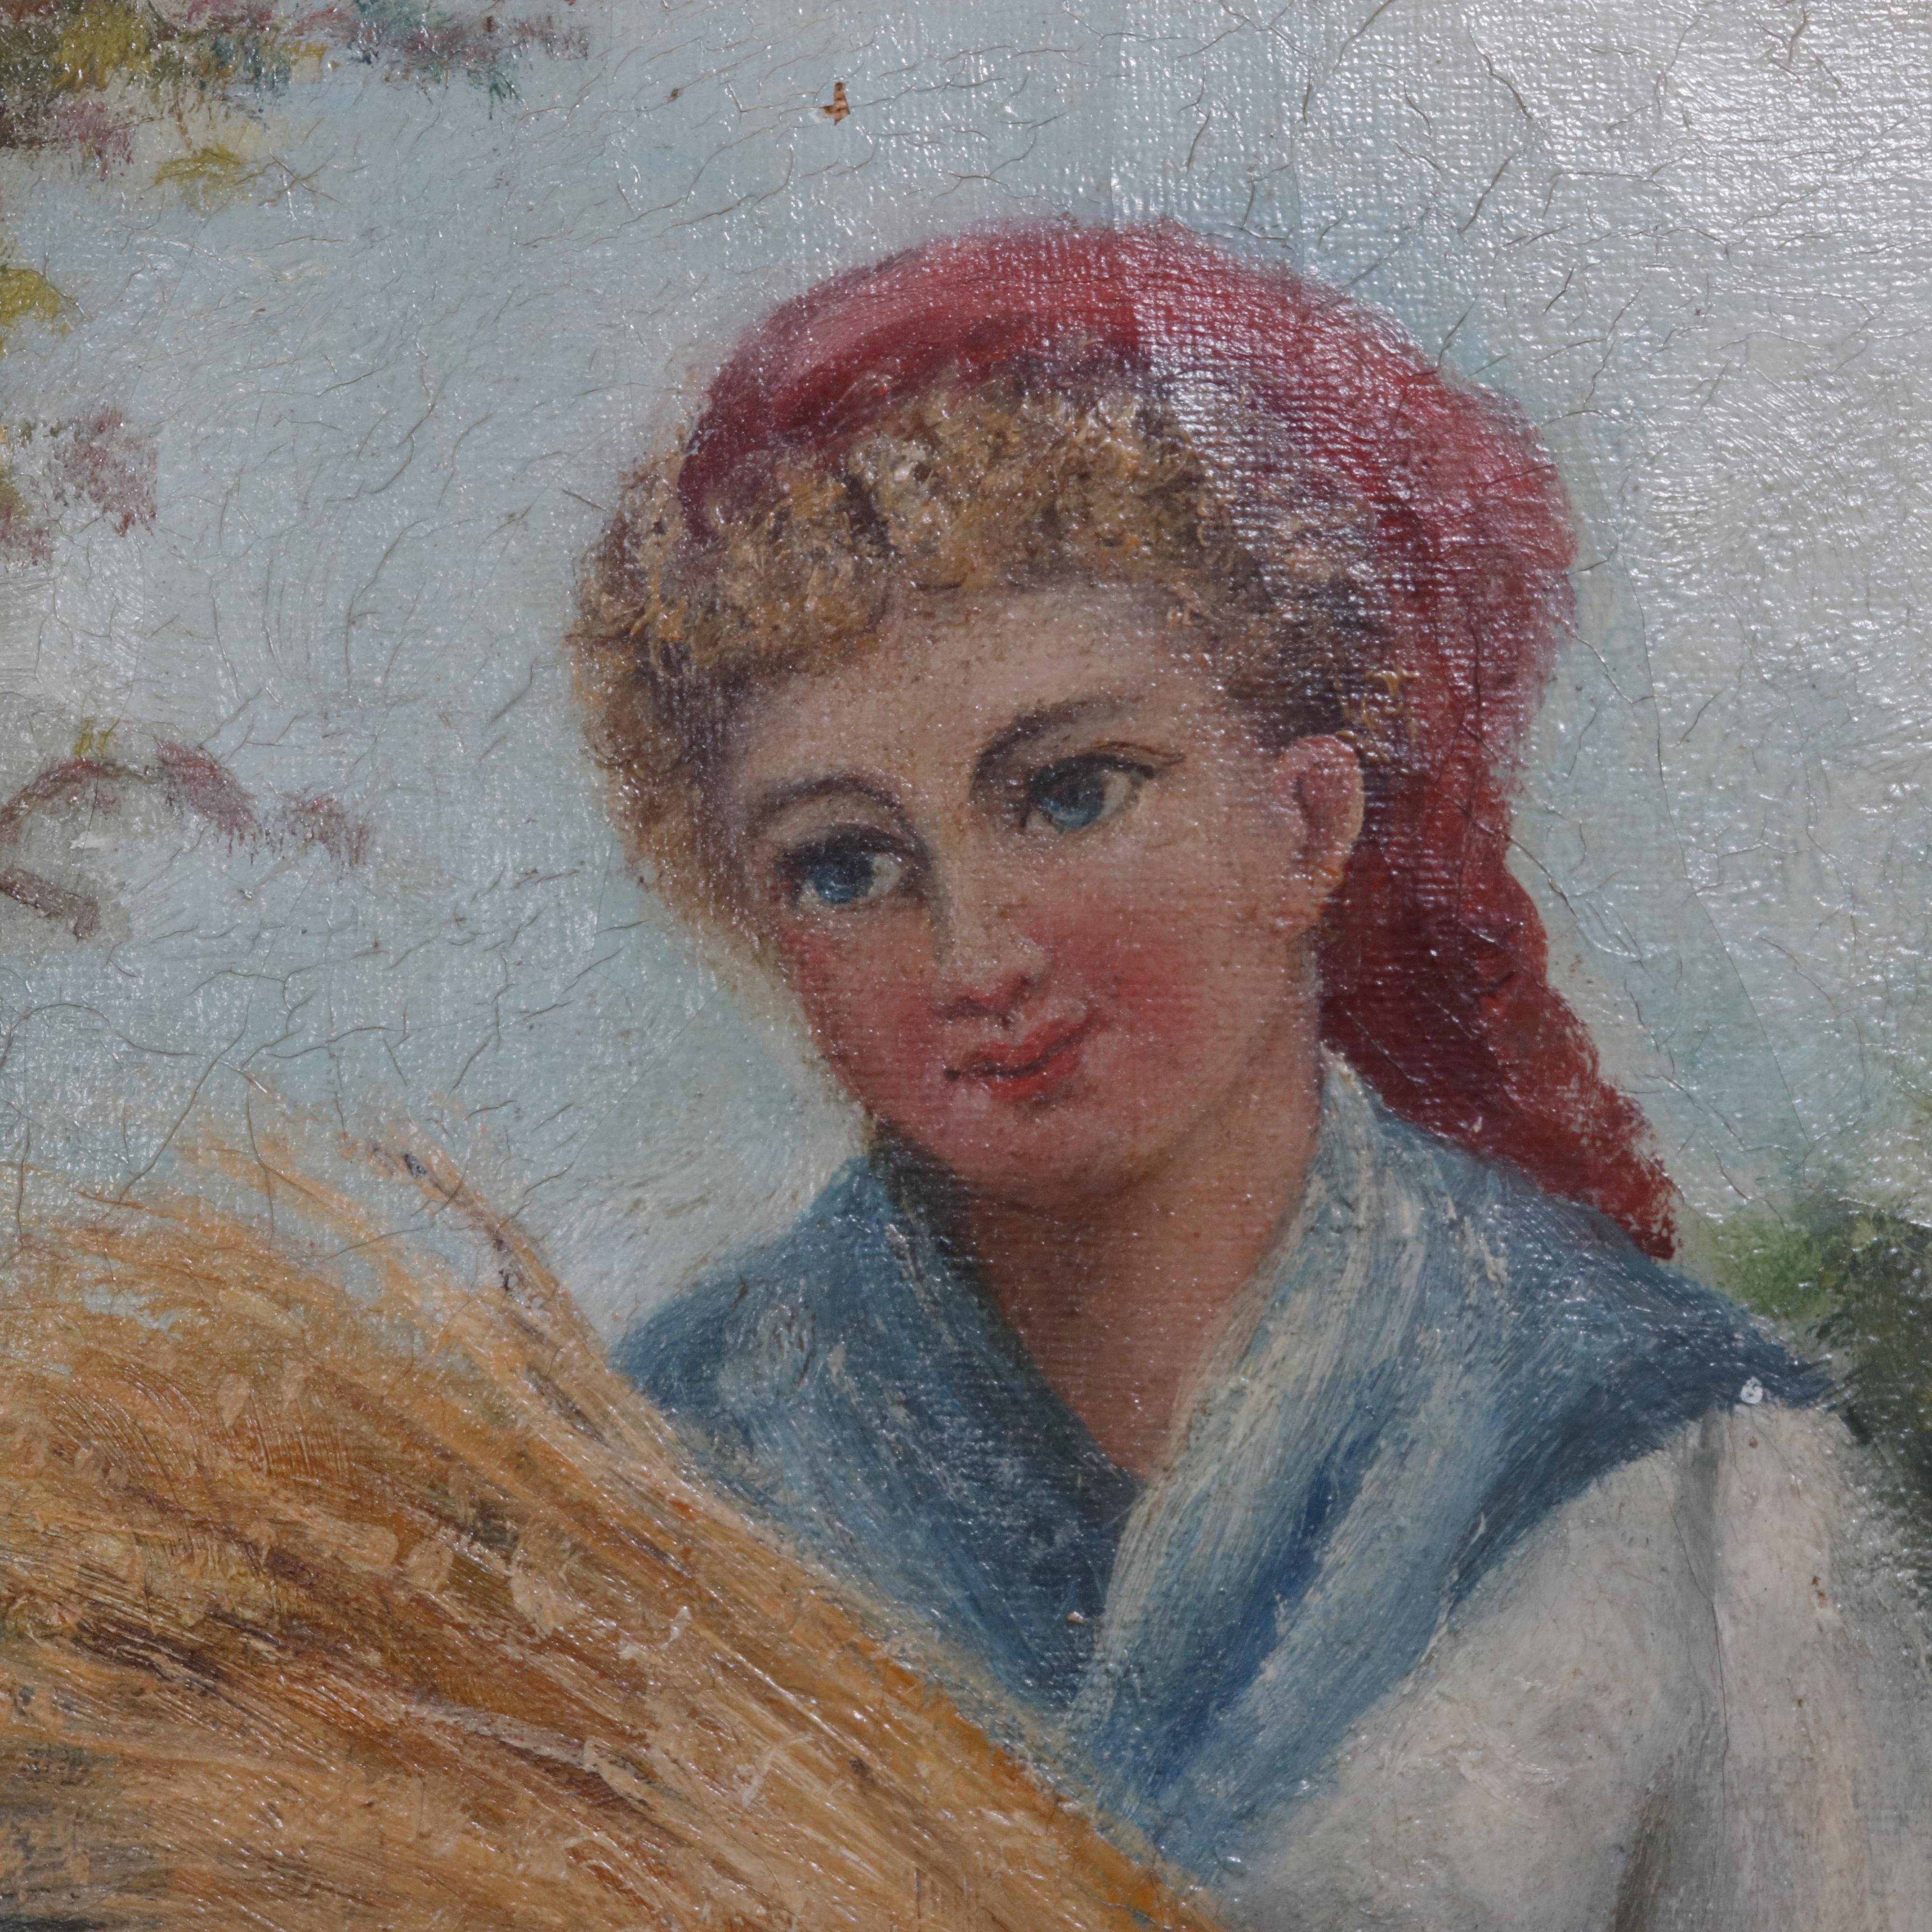 European Antique Continental Maiden in Field Portrait Oil on Canvas Painting, circa 1890